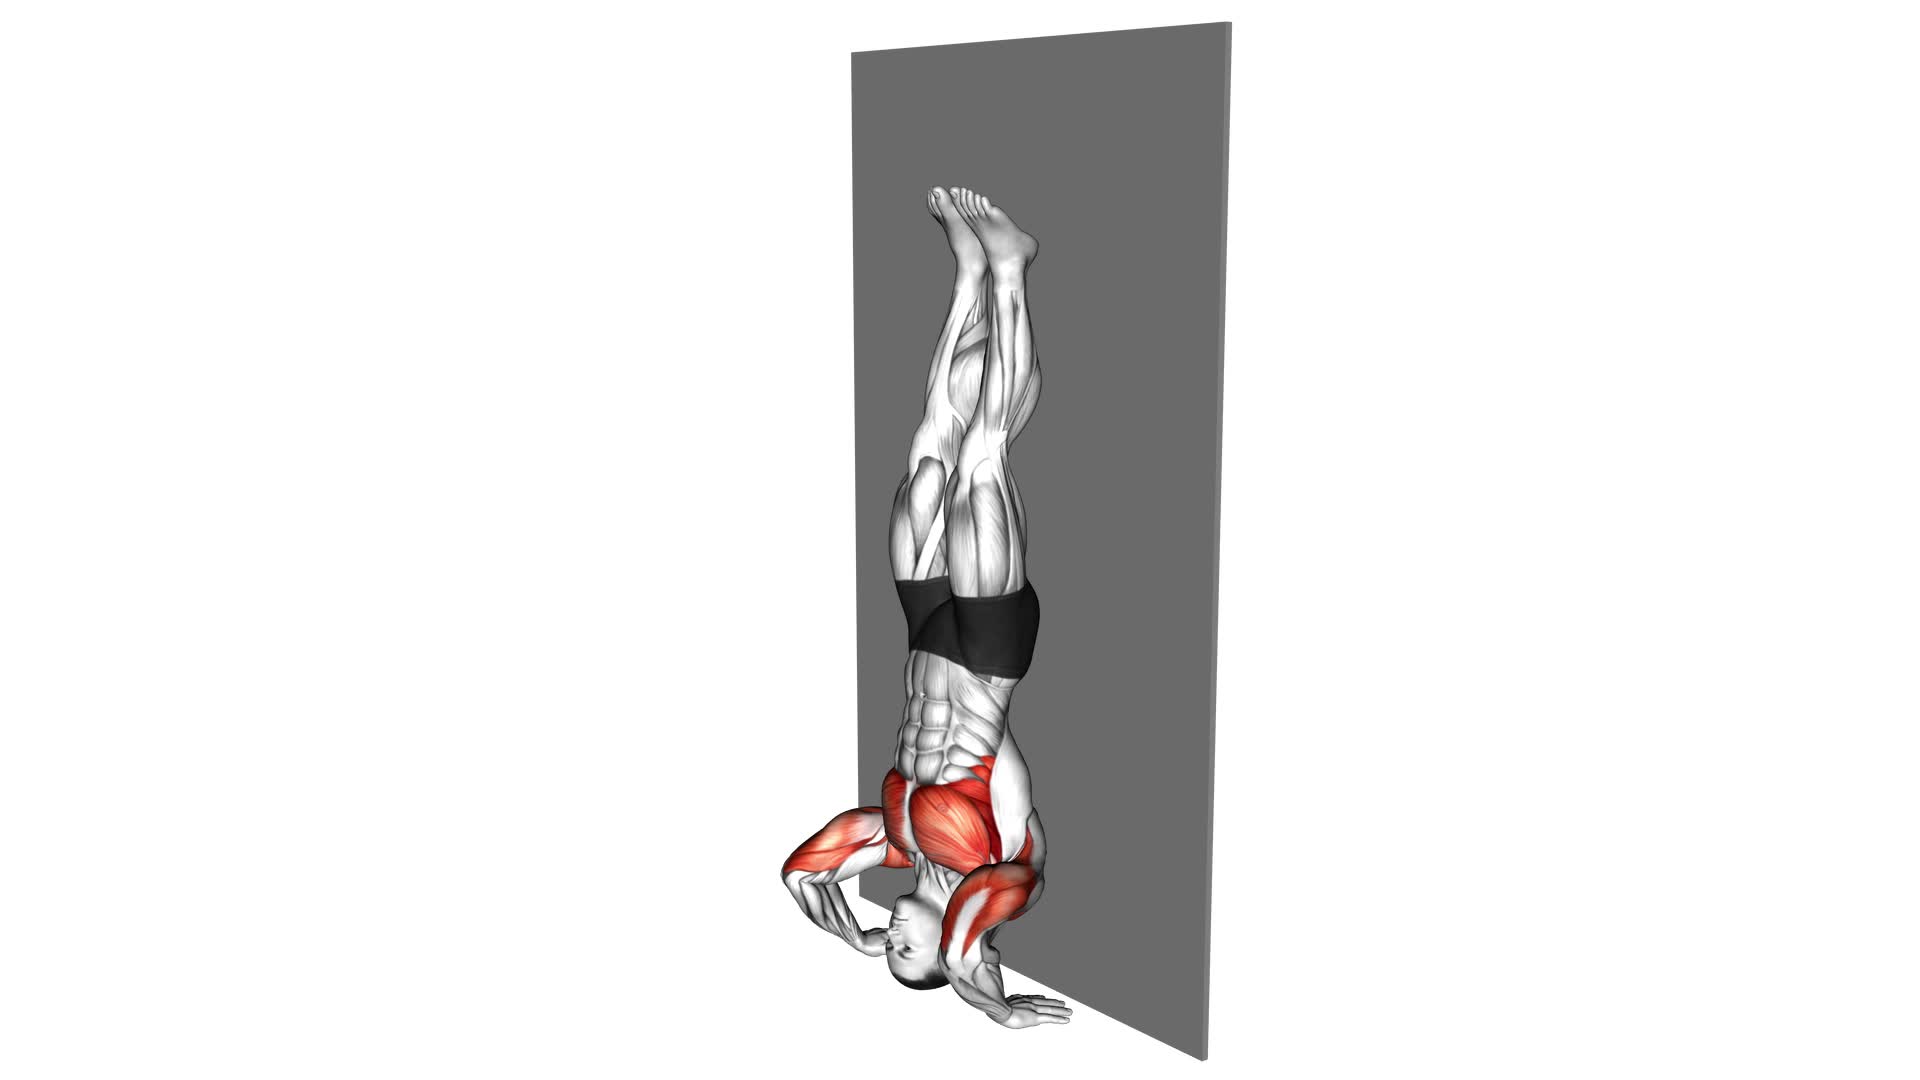 Handstand Push-up (VERSION 2) - Video Exercise Guide & Tips